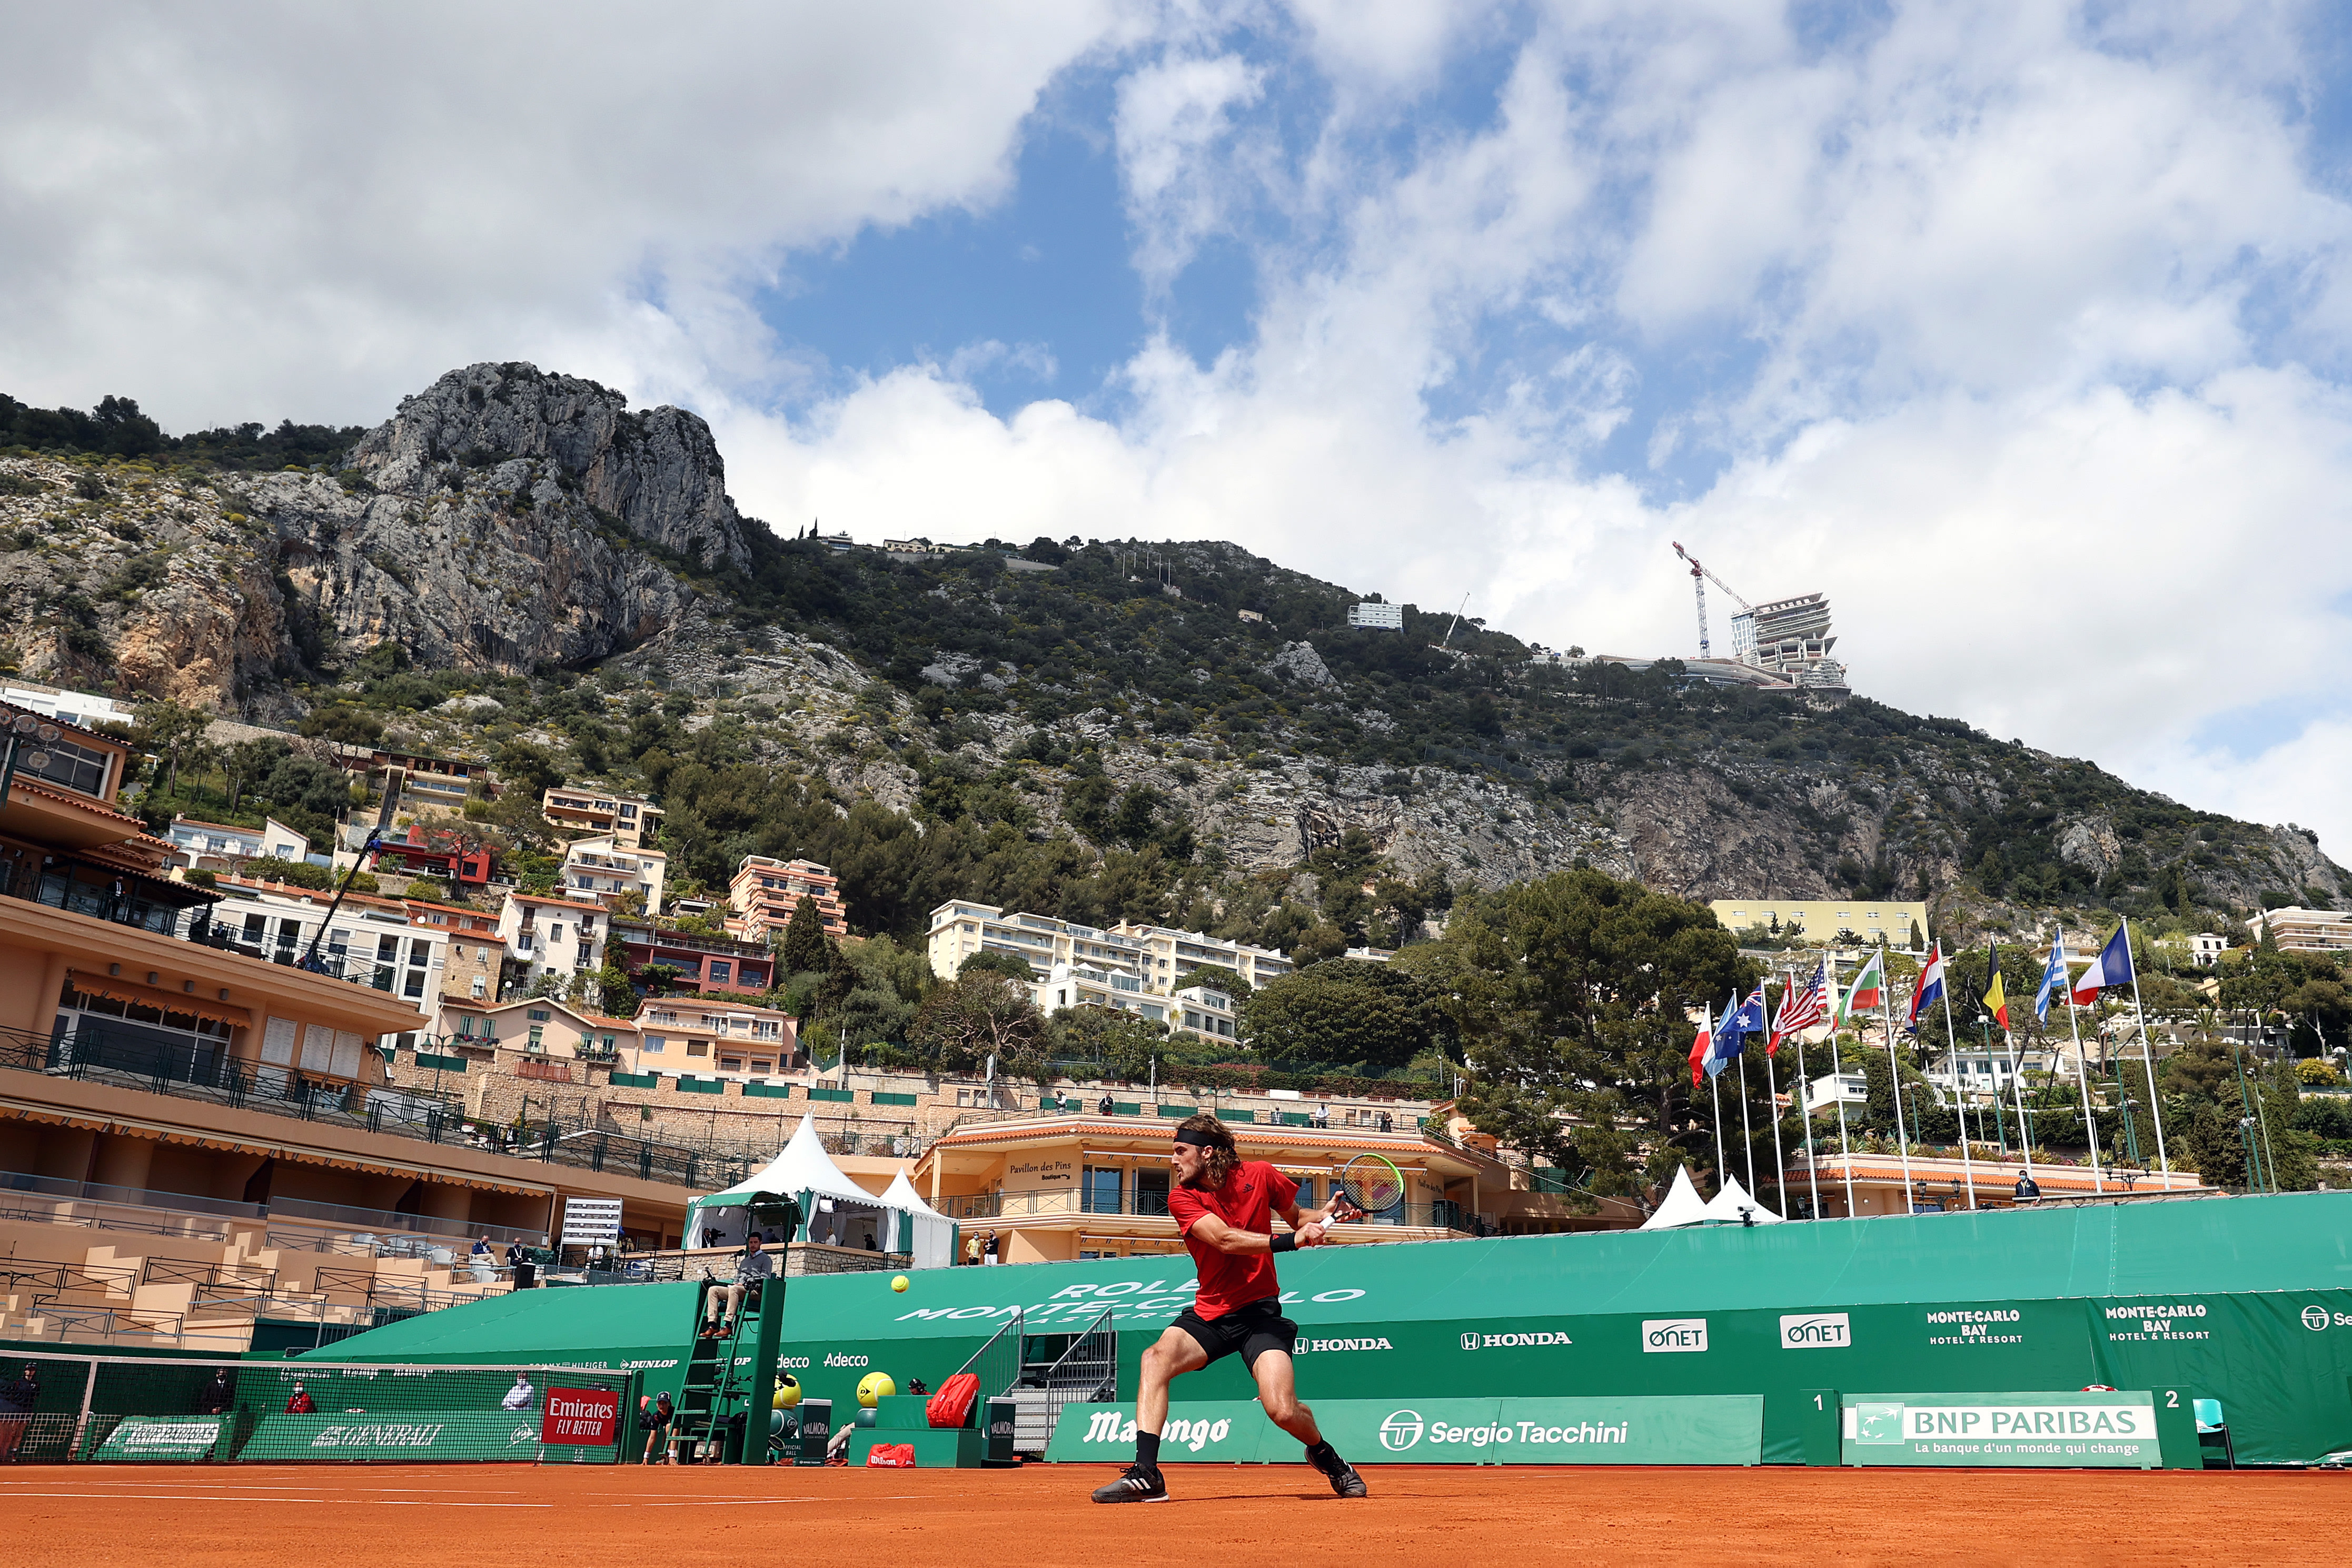 Top 5 Photos 4/13 Play resumes in Monte Carlo on Day 3